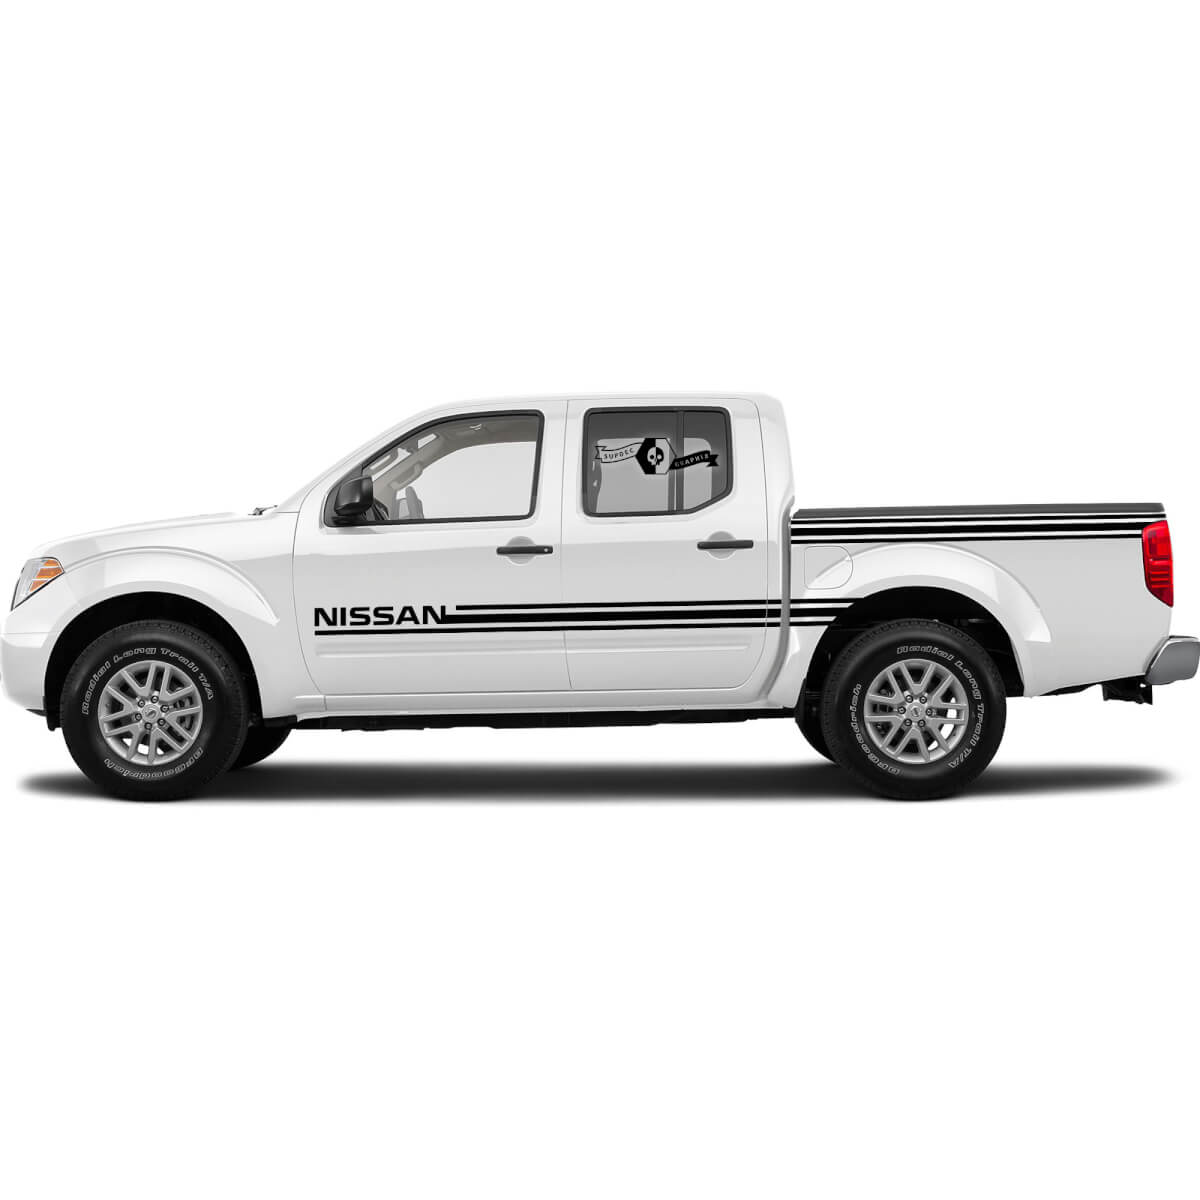 2 Decal Sticker Graphic Side Stripe Doors and Bed For Nissan Frontier Navara D40 D22 